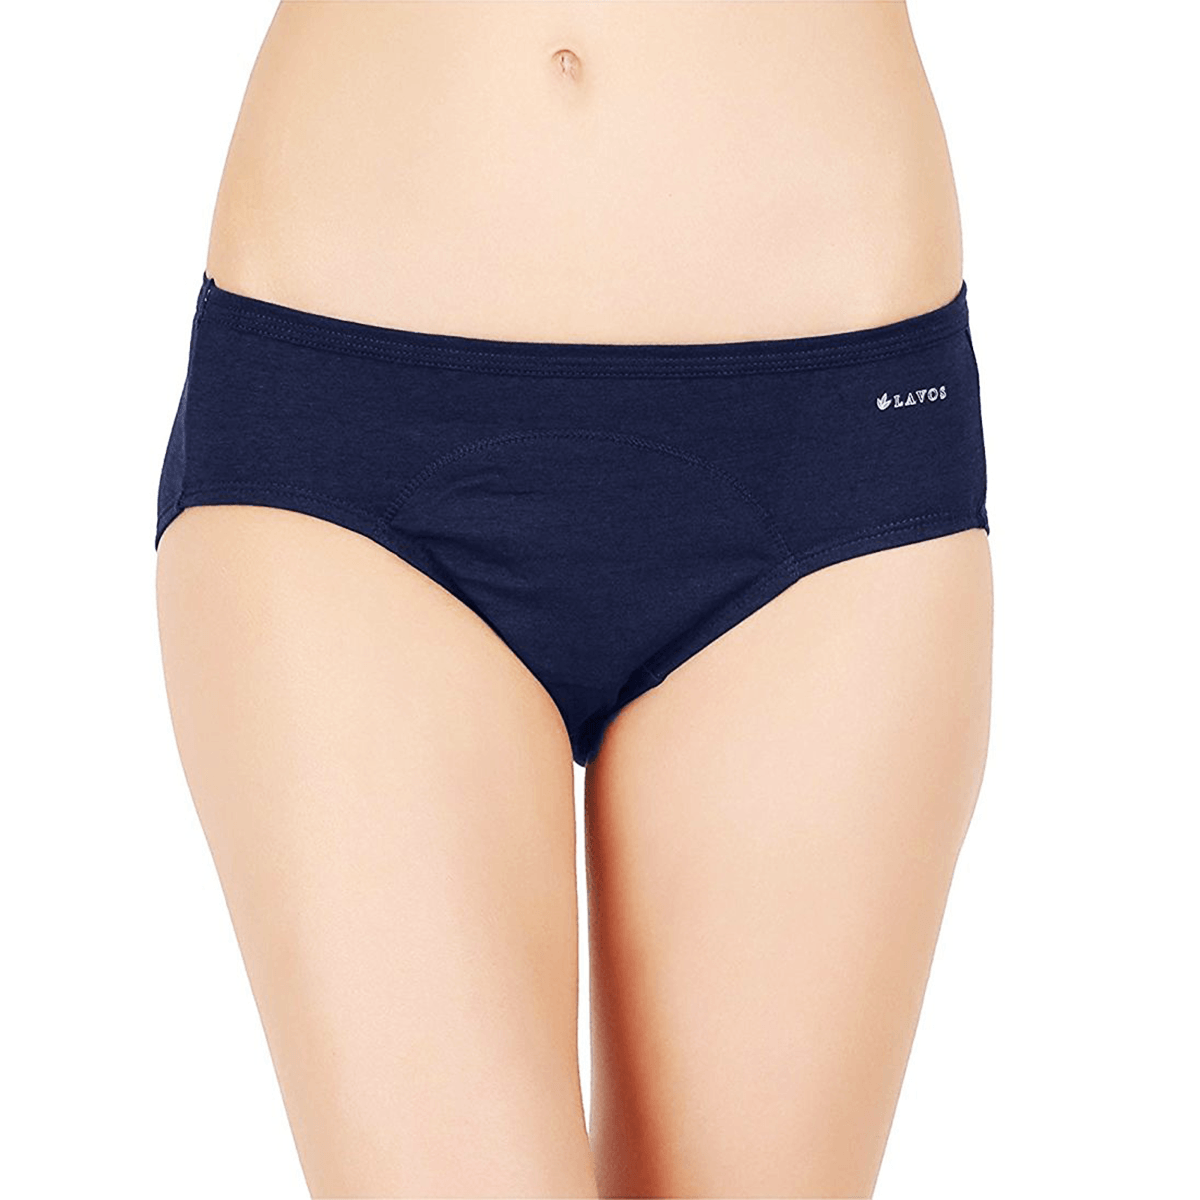 Lavos Womens No Stain Panty Navy